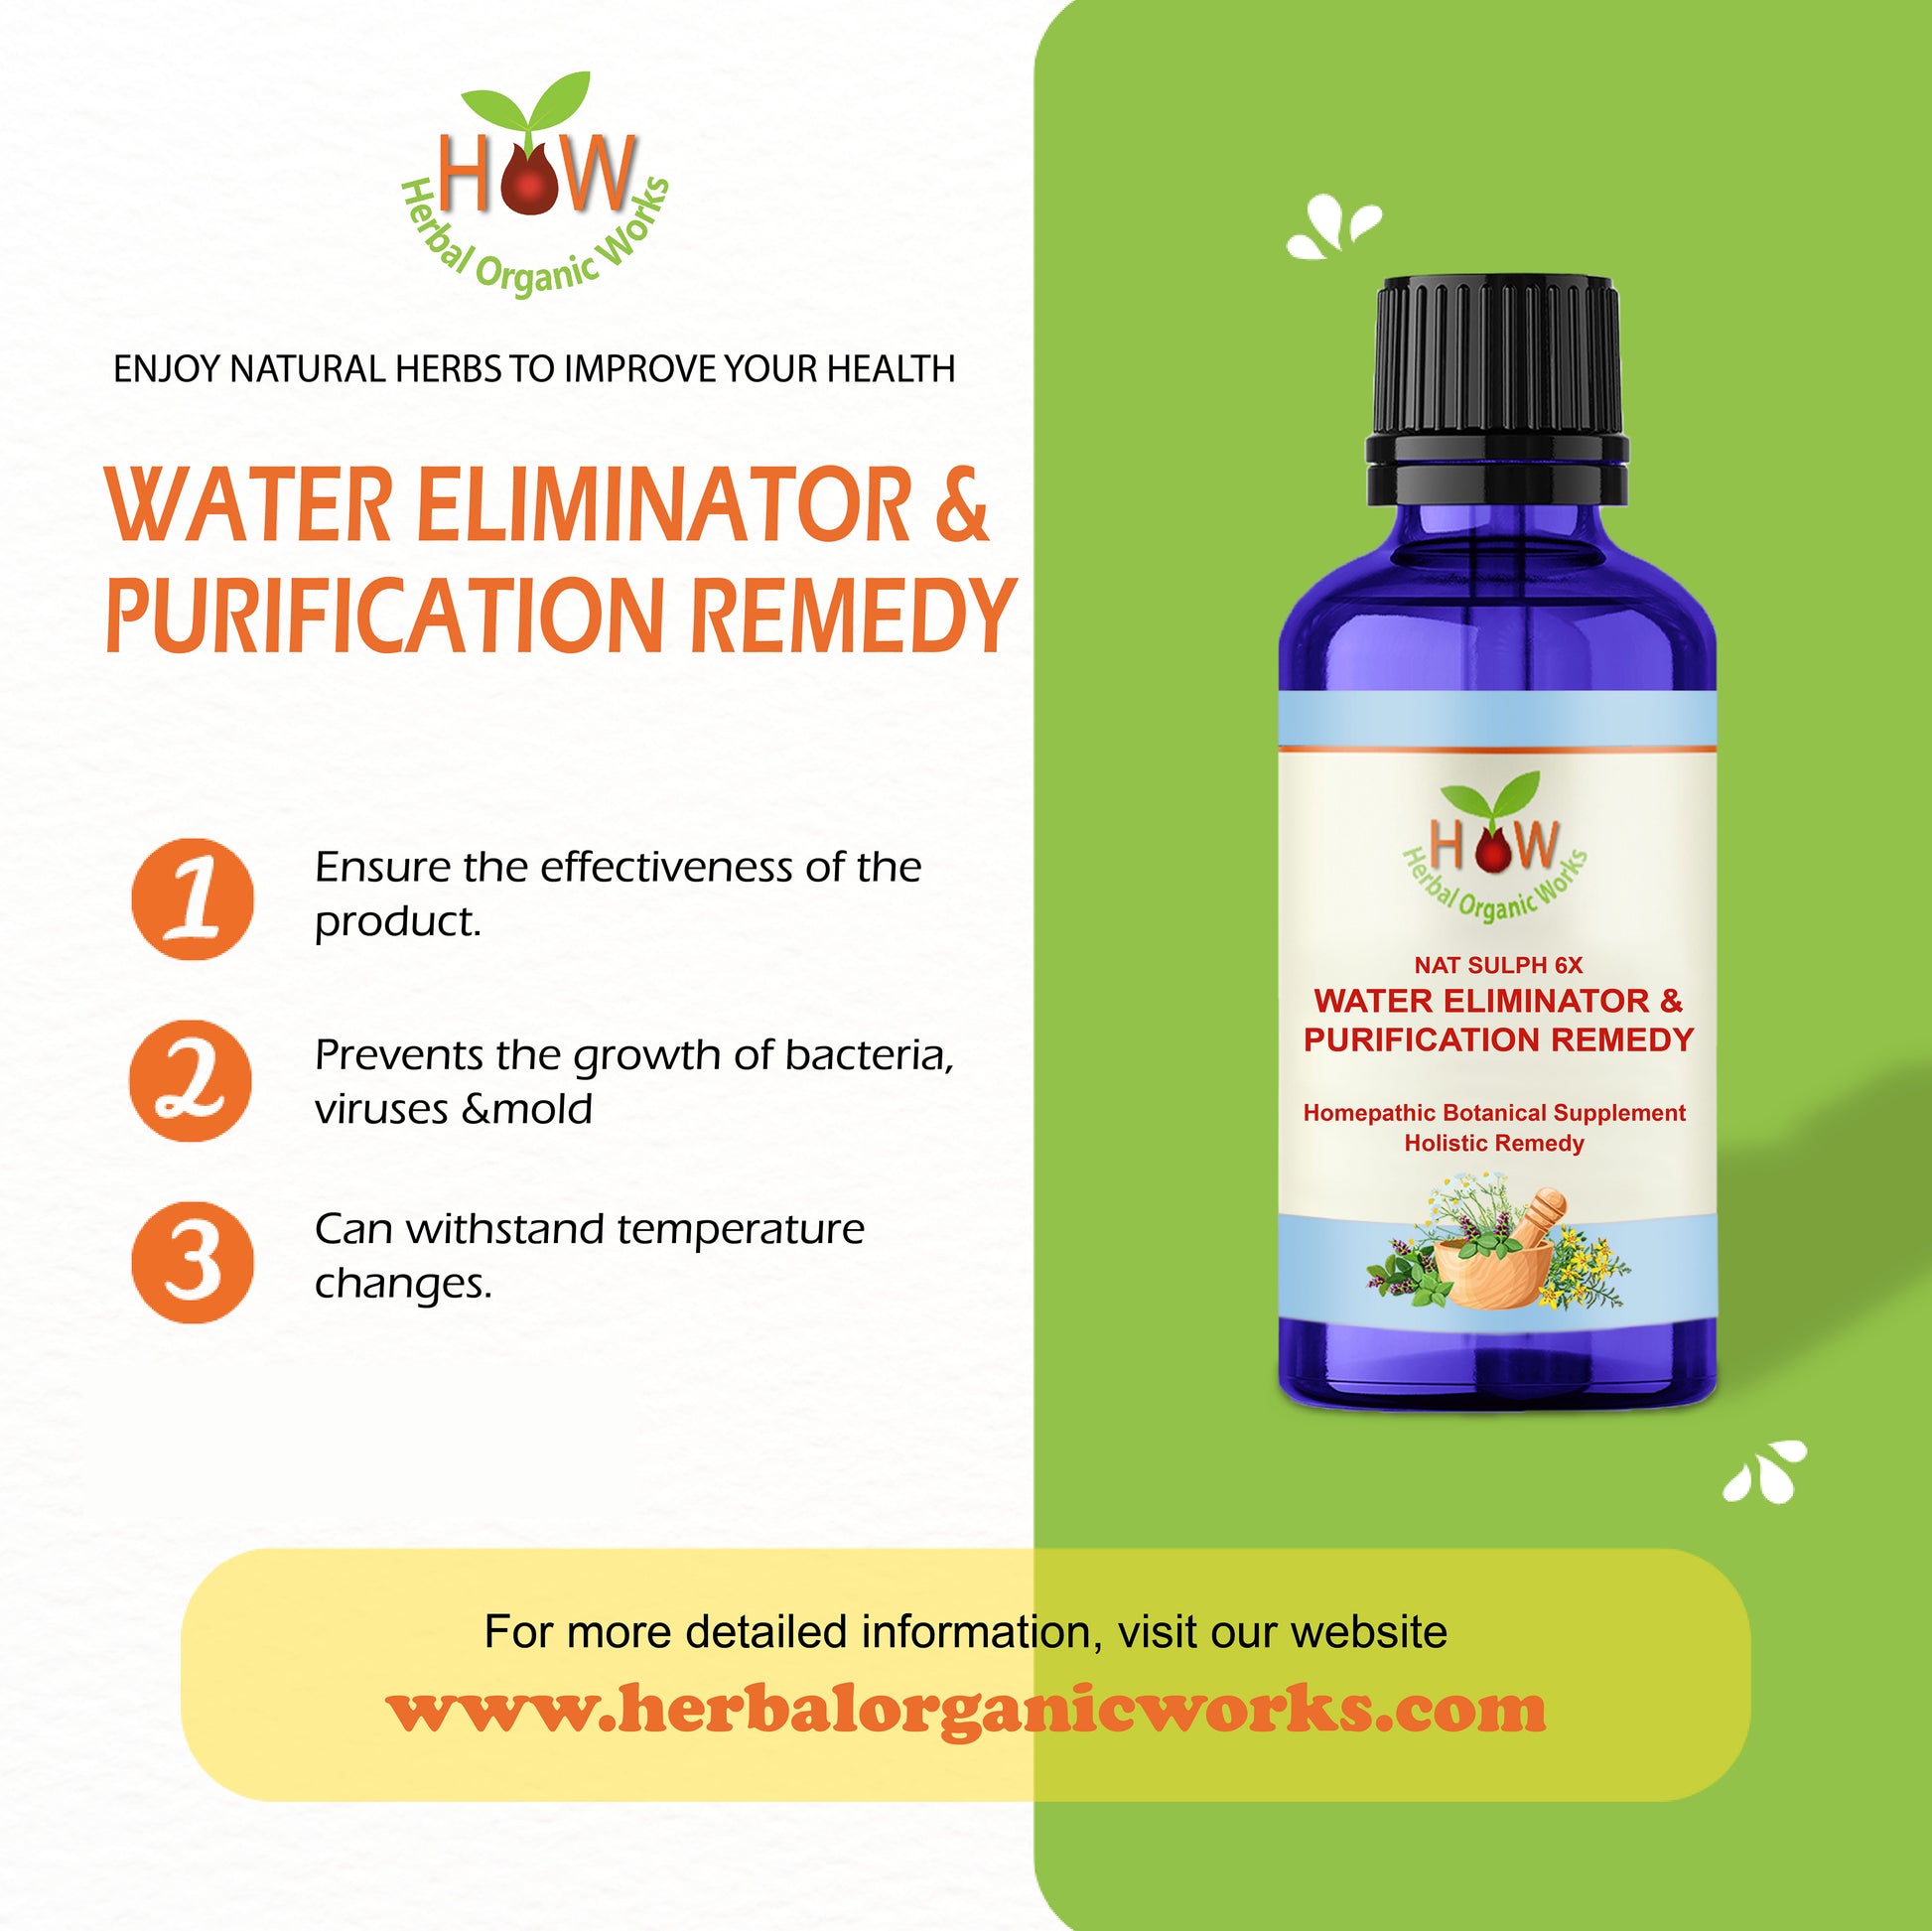 WATER ELIMINATOR AND PURIFICATION REMEDY